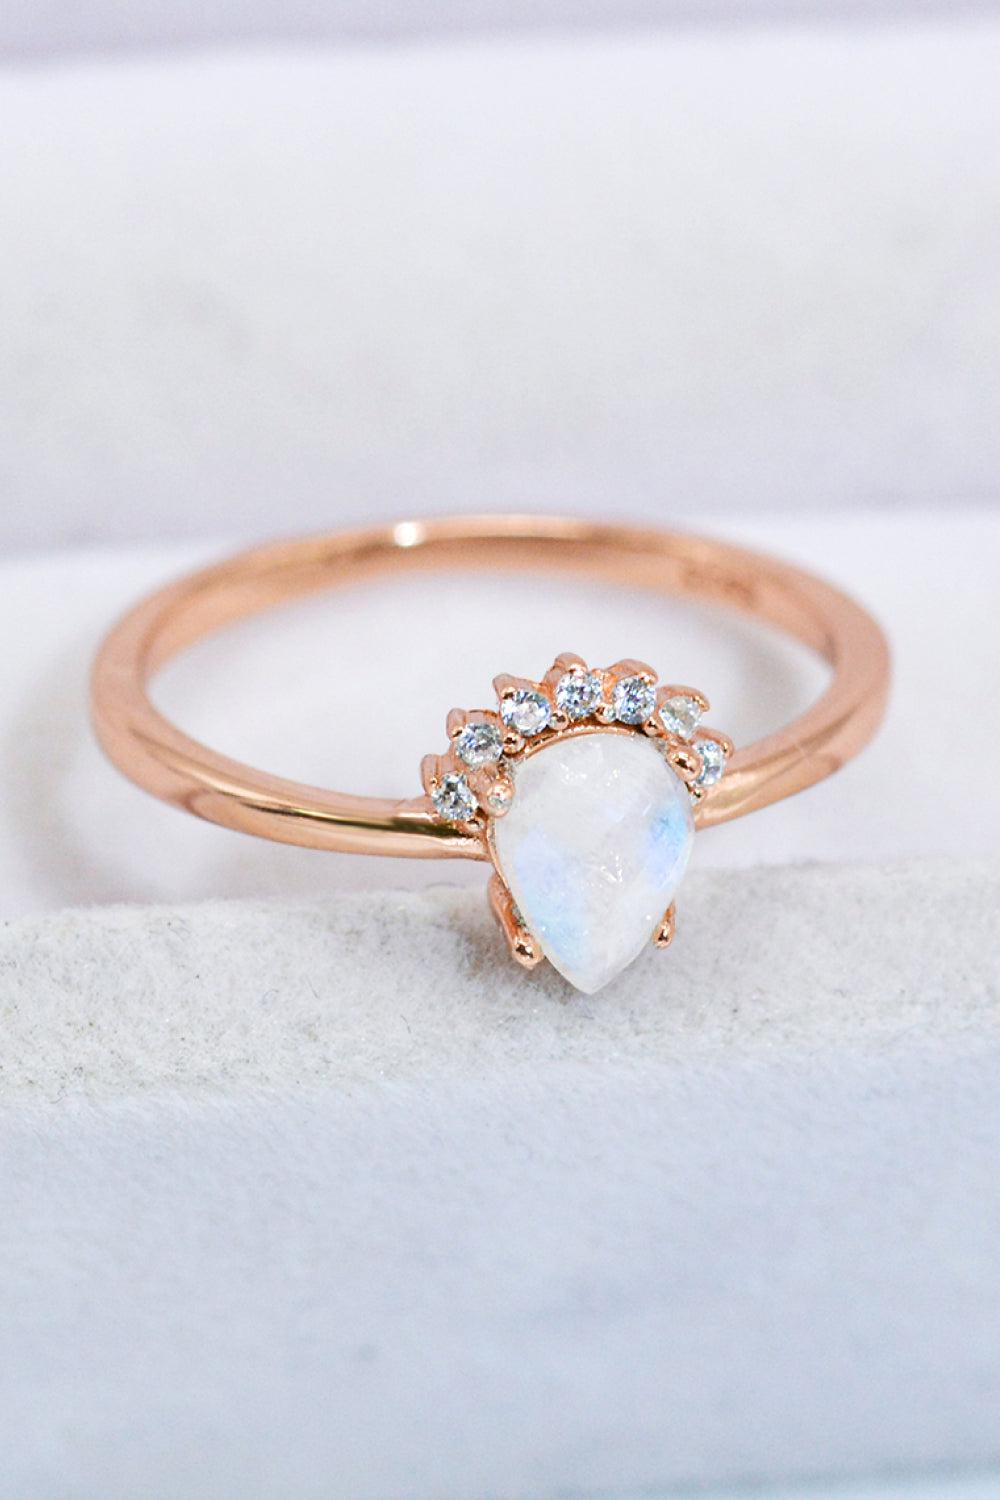 18K Rose Gold-Plated Pear Shape Natural Moonstone Ring BLUE ZONE PLANET